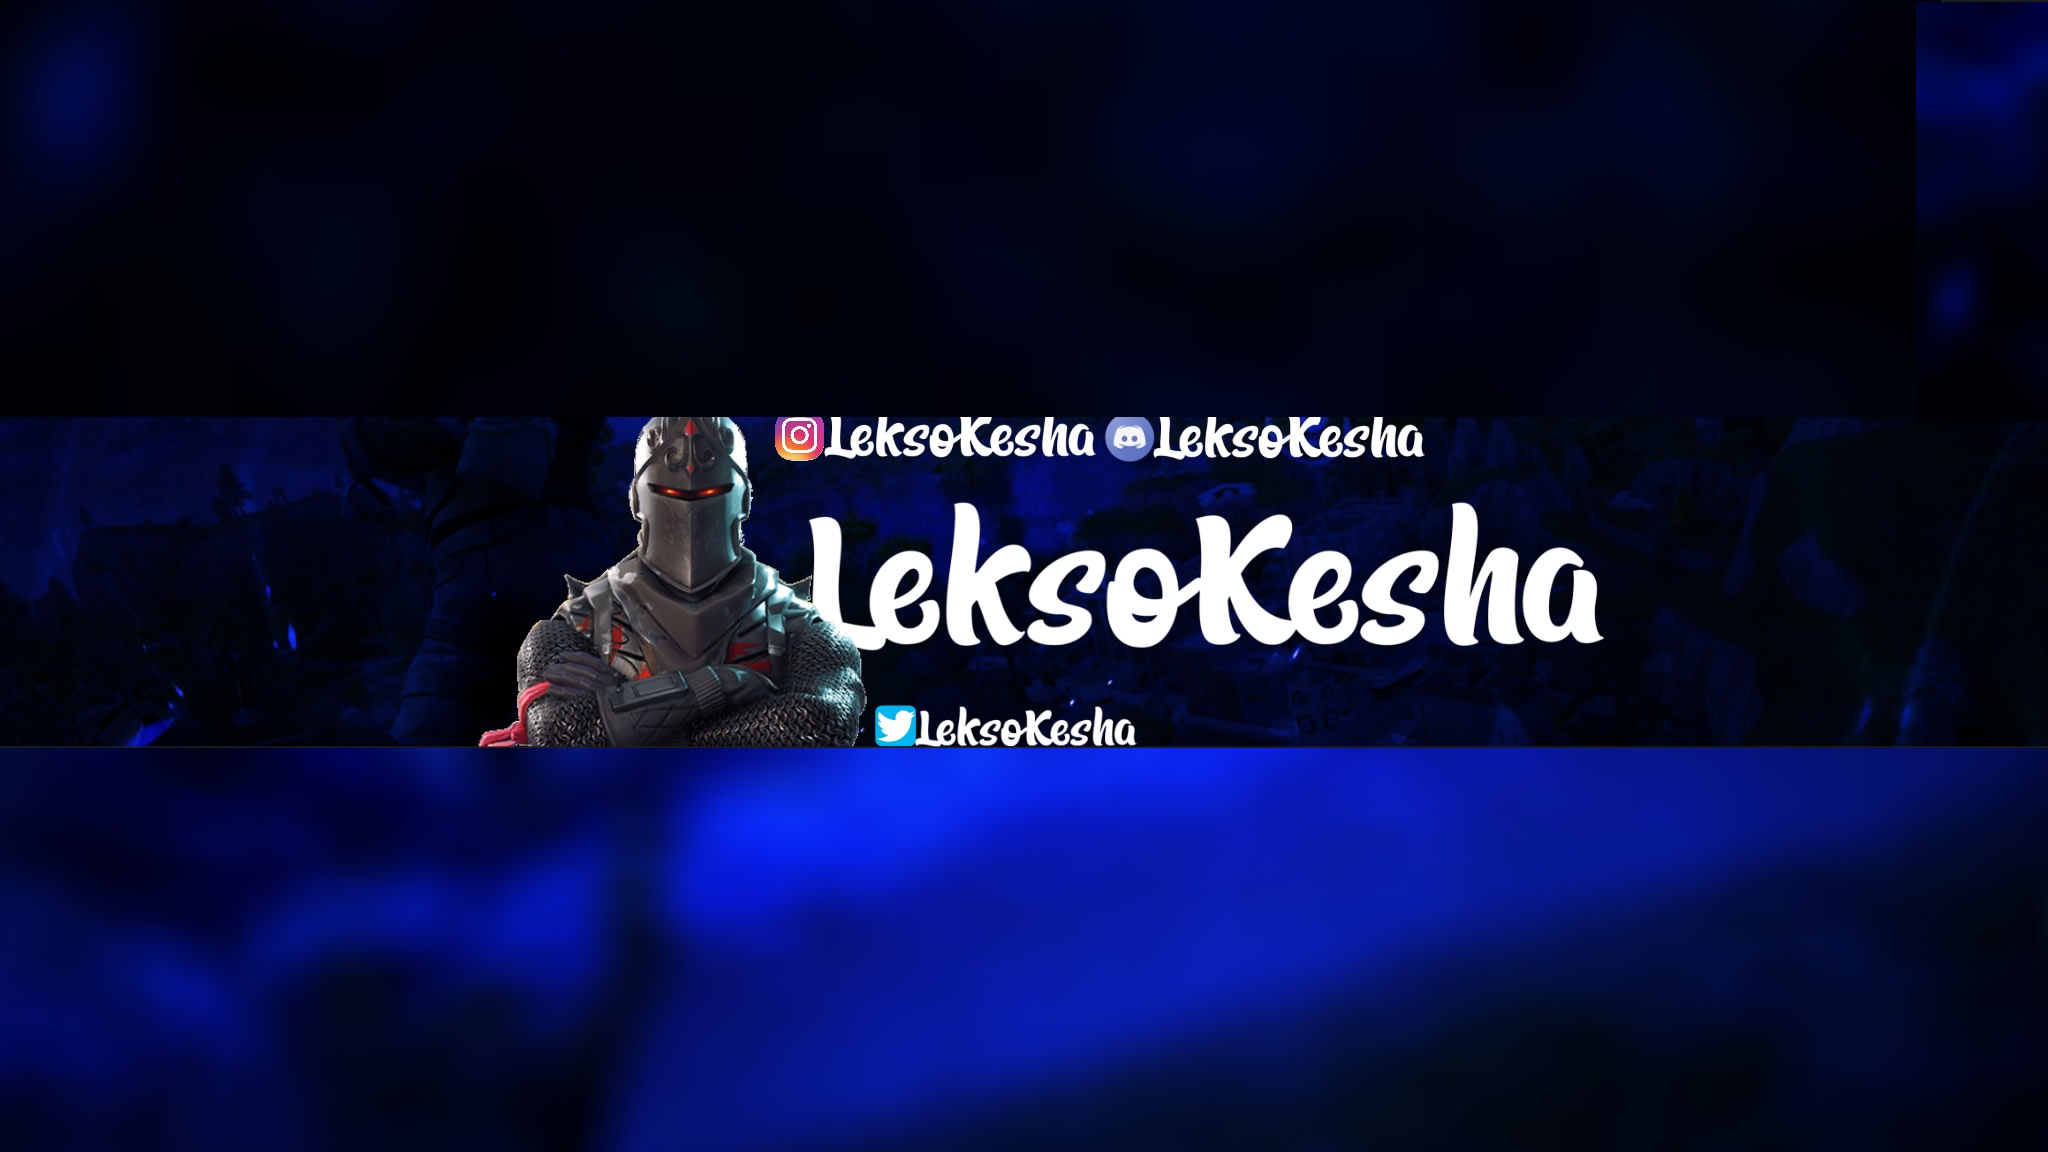 Make Proffesional Looking Banner For Gaming Youtube Channel By Leksokesha